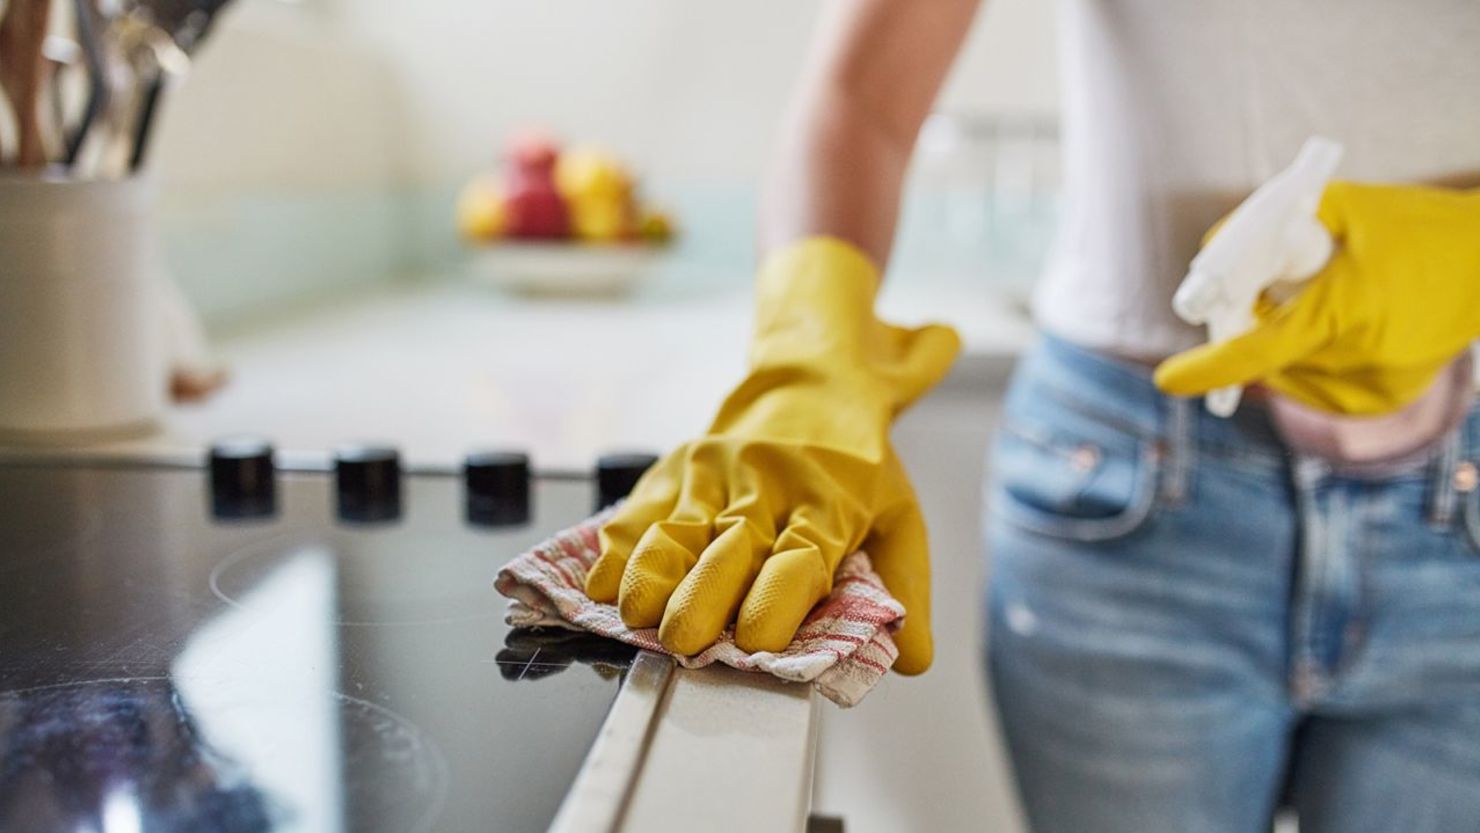 Top 6 Benefits of Kitchen Cleaning Services for Your Home